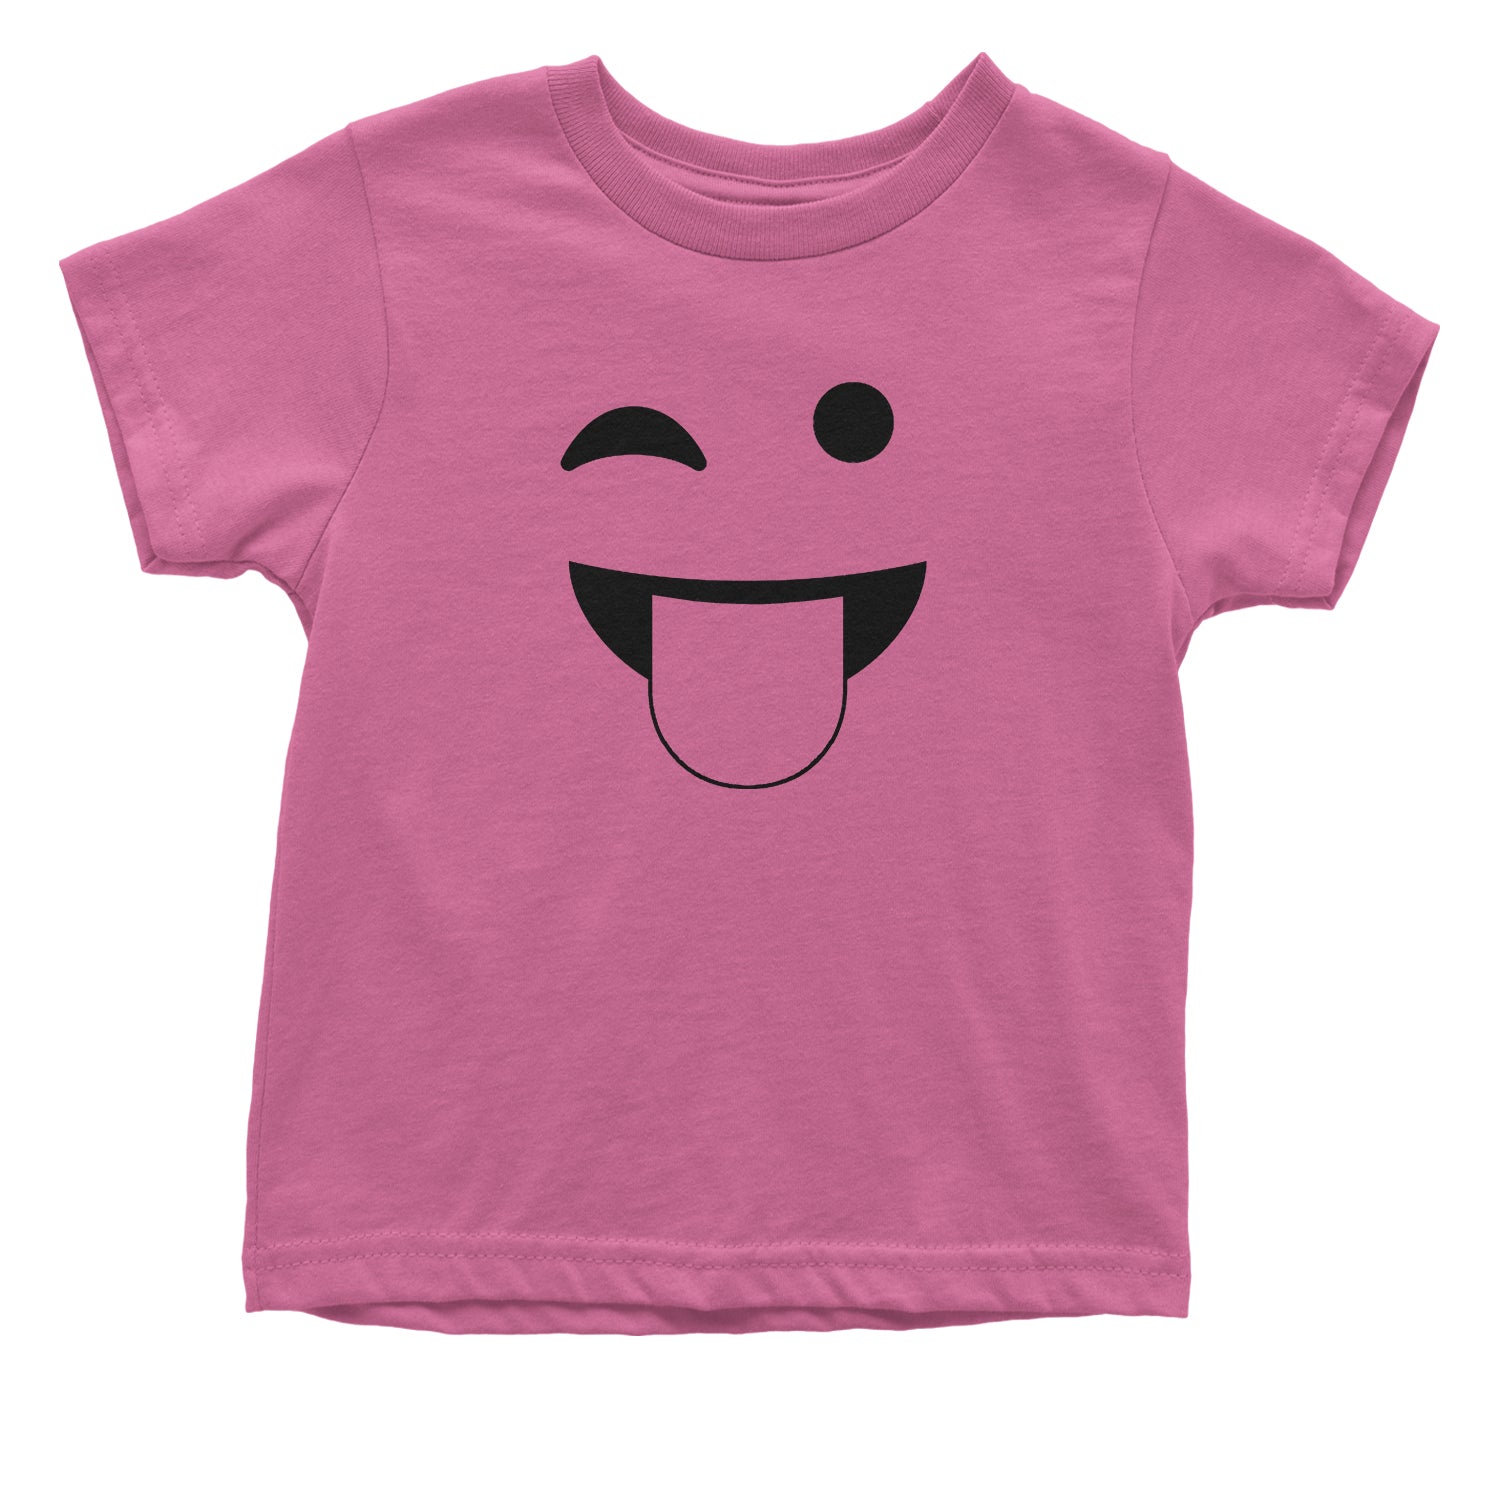 Emoticon Tongue Hanging Out Smile Face Toddler T-Shirt cosplay, costume, dress, emoji, emote, face, halloween, smiley, up, yellow by Expression Tees